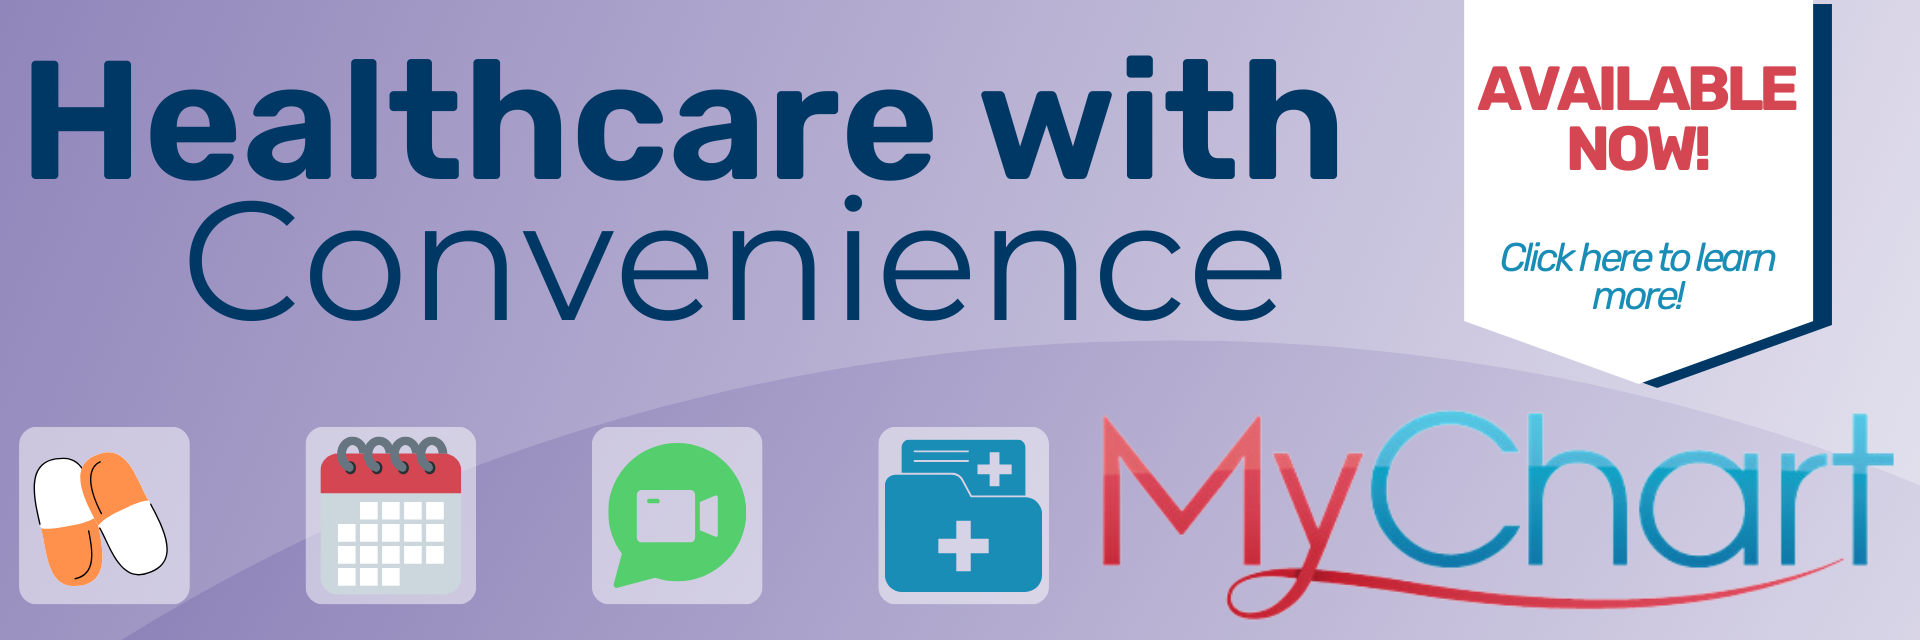 MyChart now available
Healthcare with Convenience